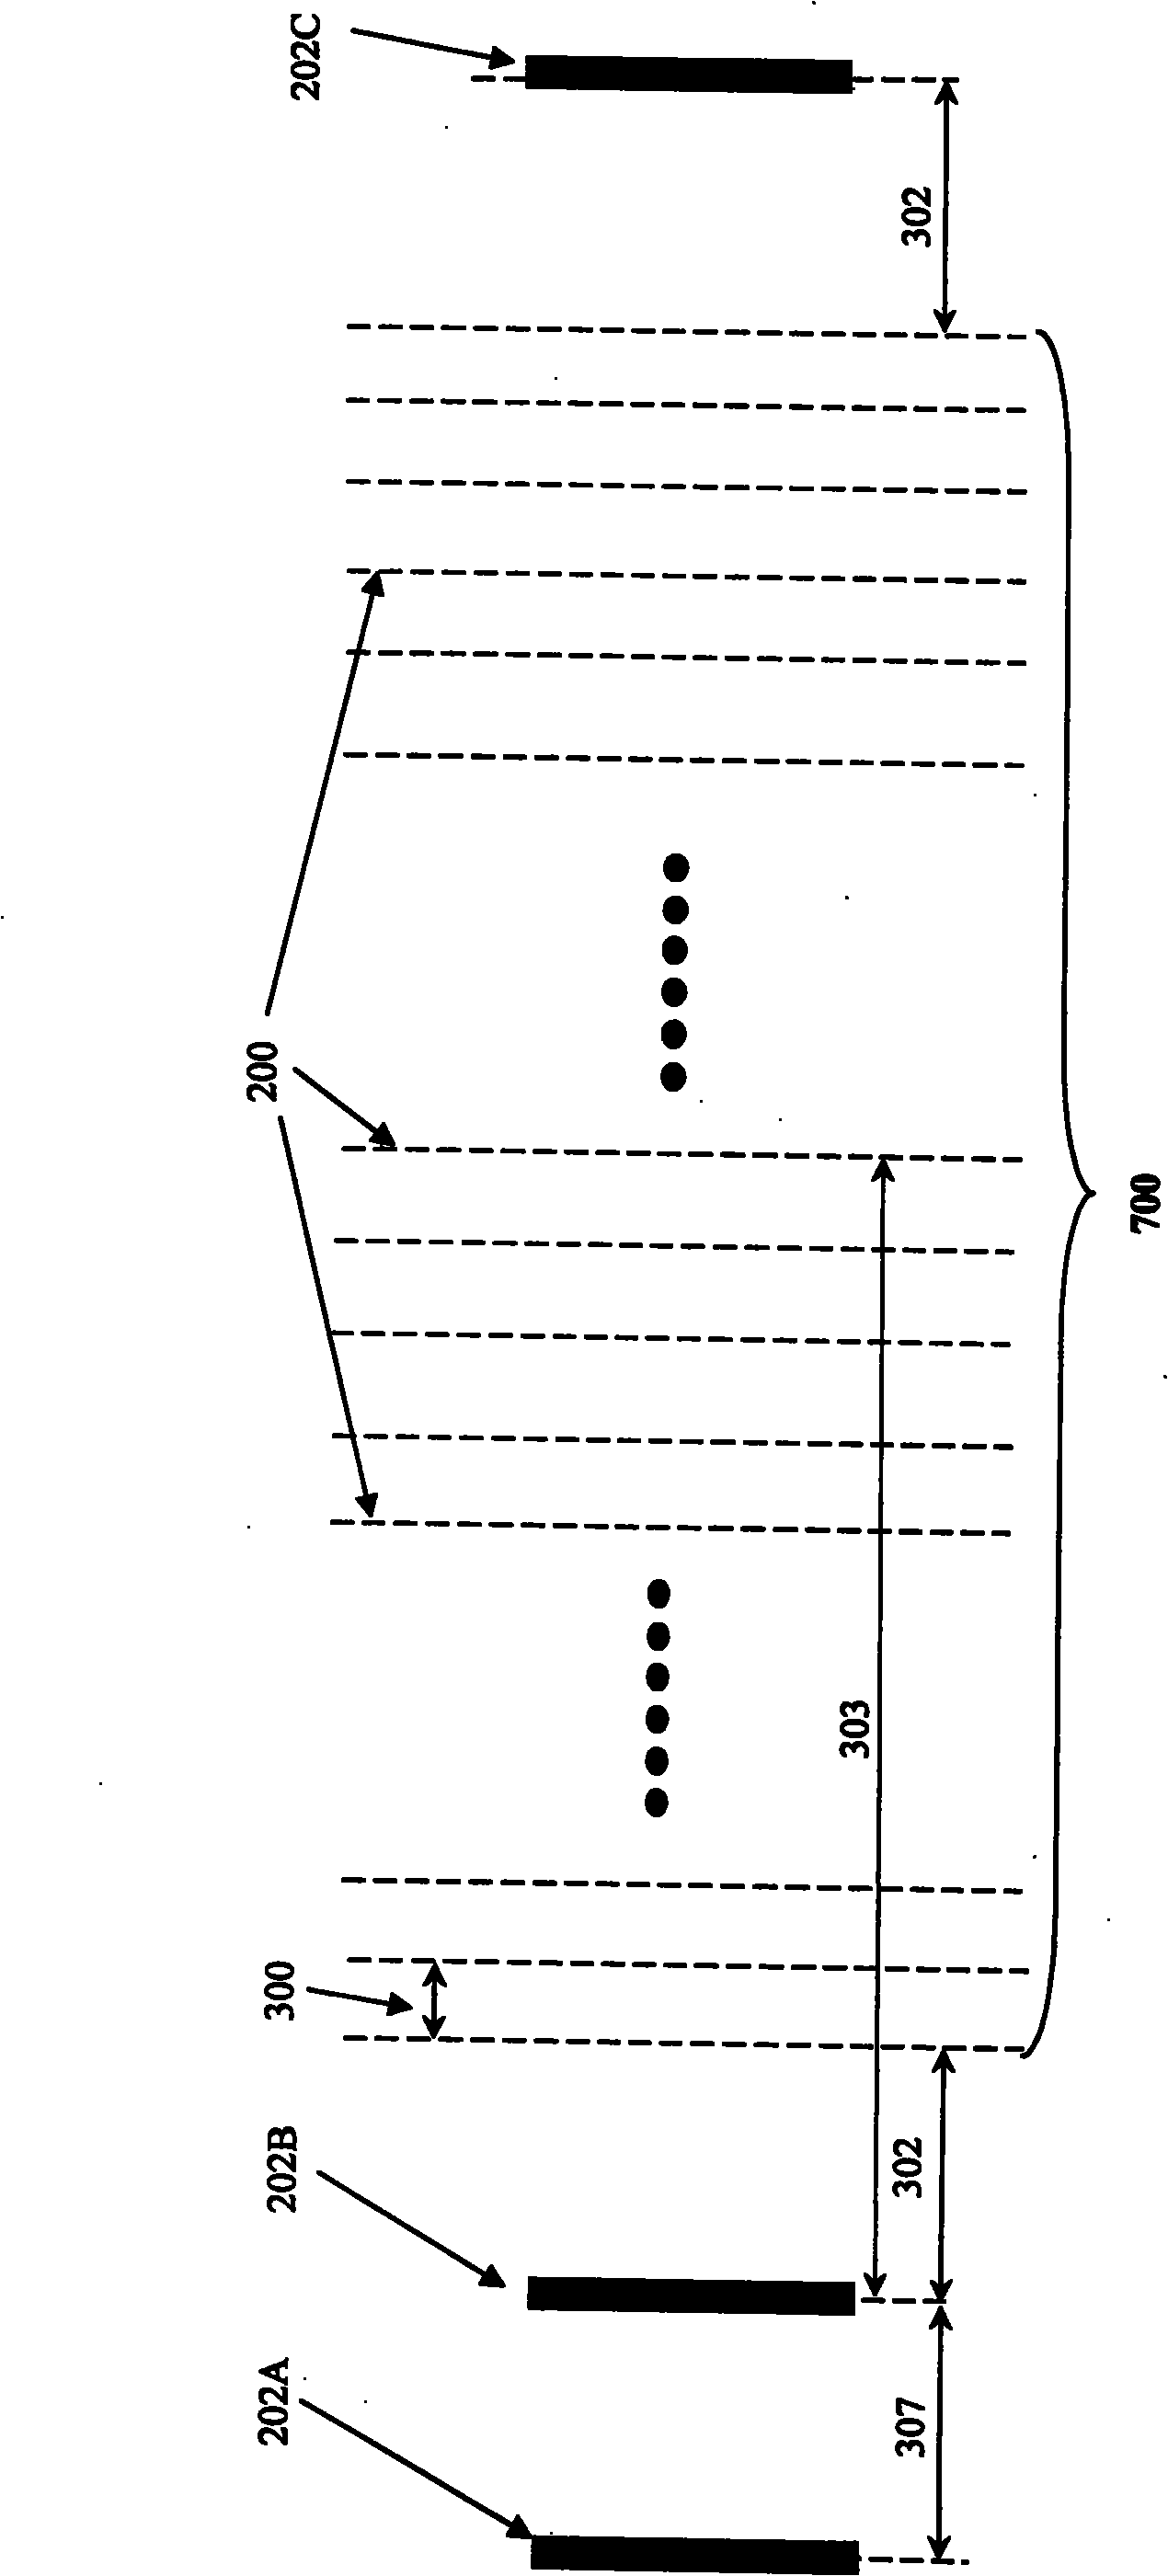 Acoustic surface wave radio frequency tag with high coding capacity